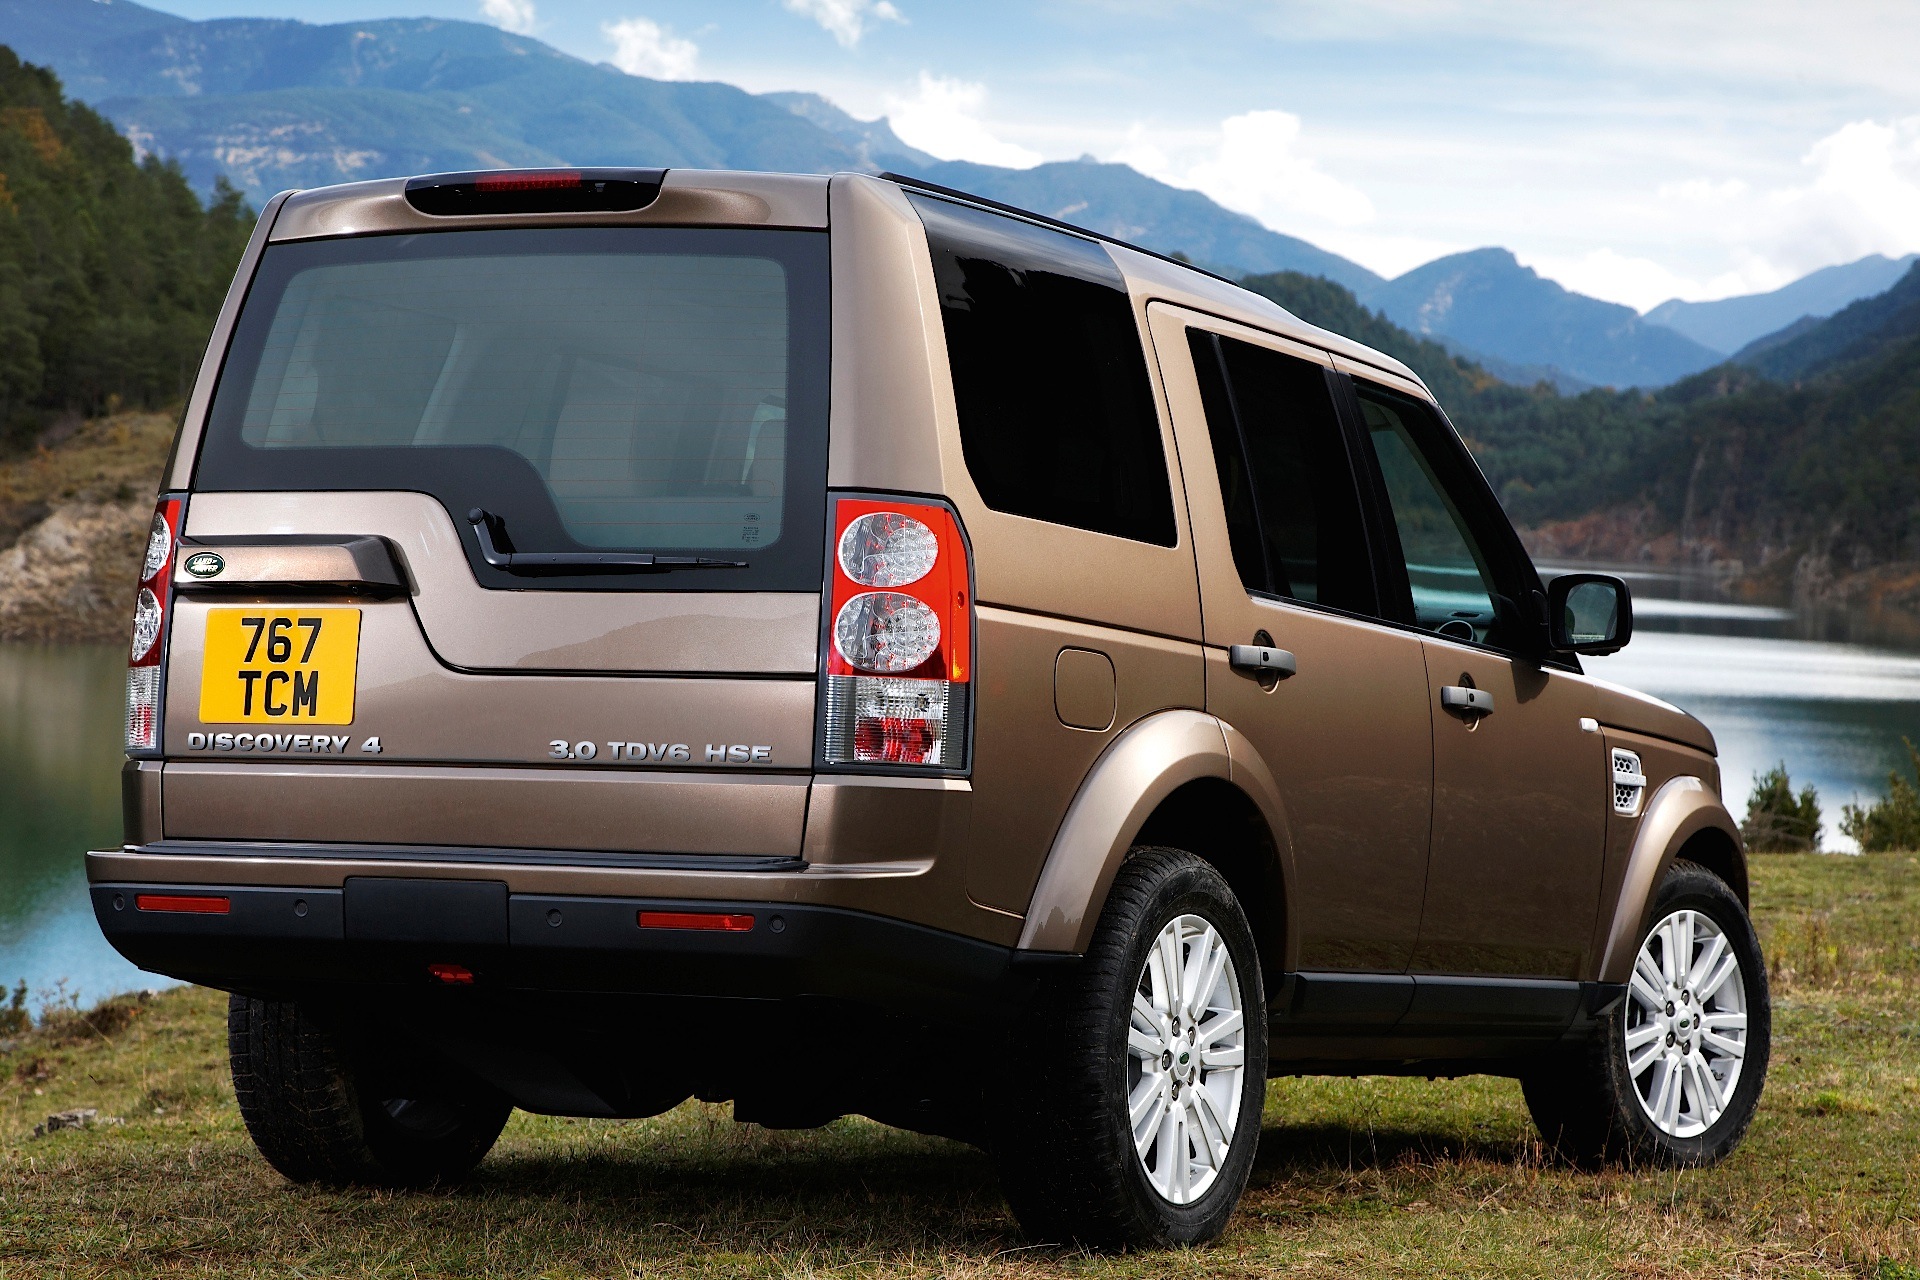 LAND ROVER Discovery LR4 2009, 2010, 2011, 2012, 2013